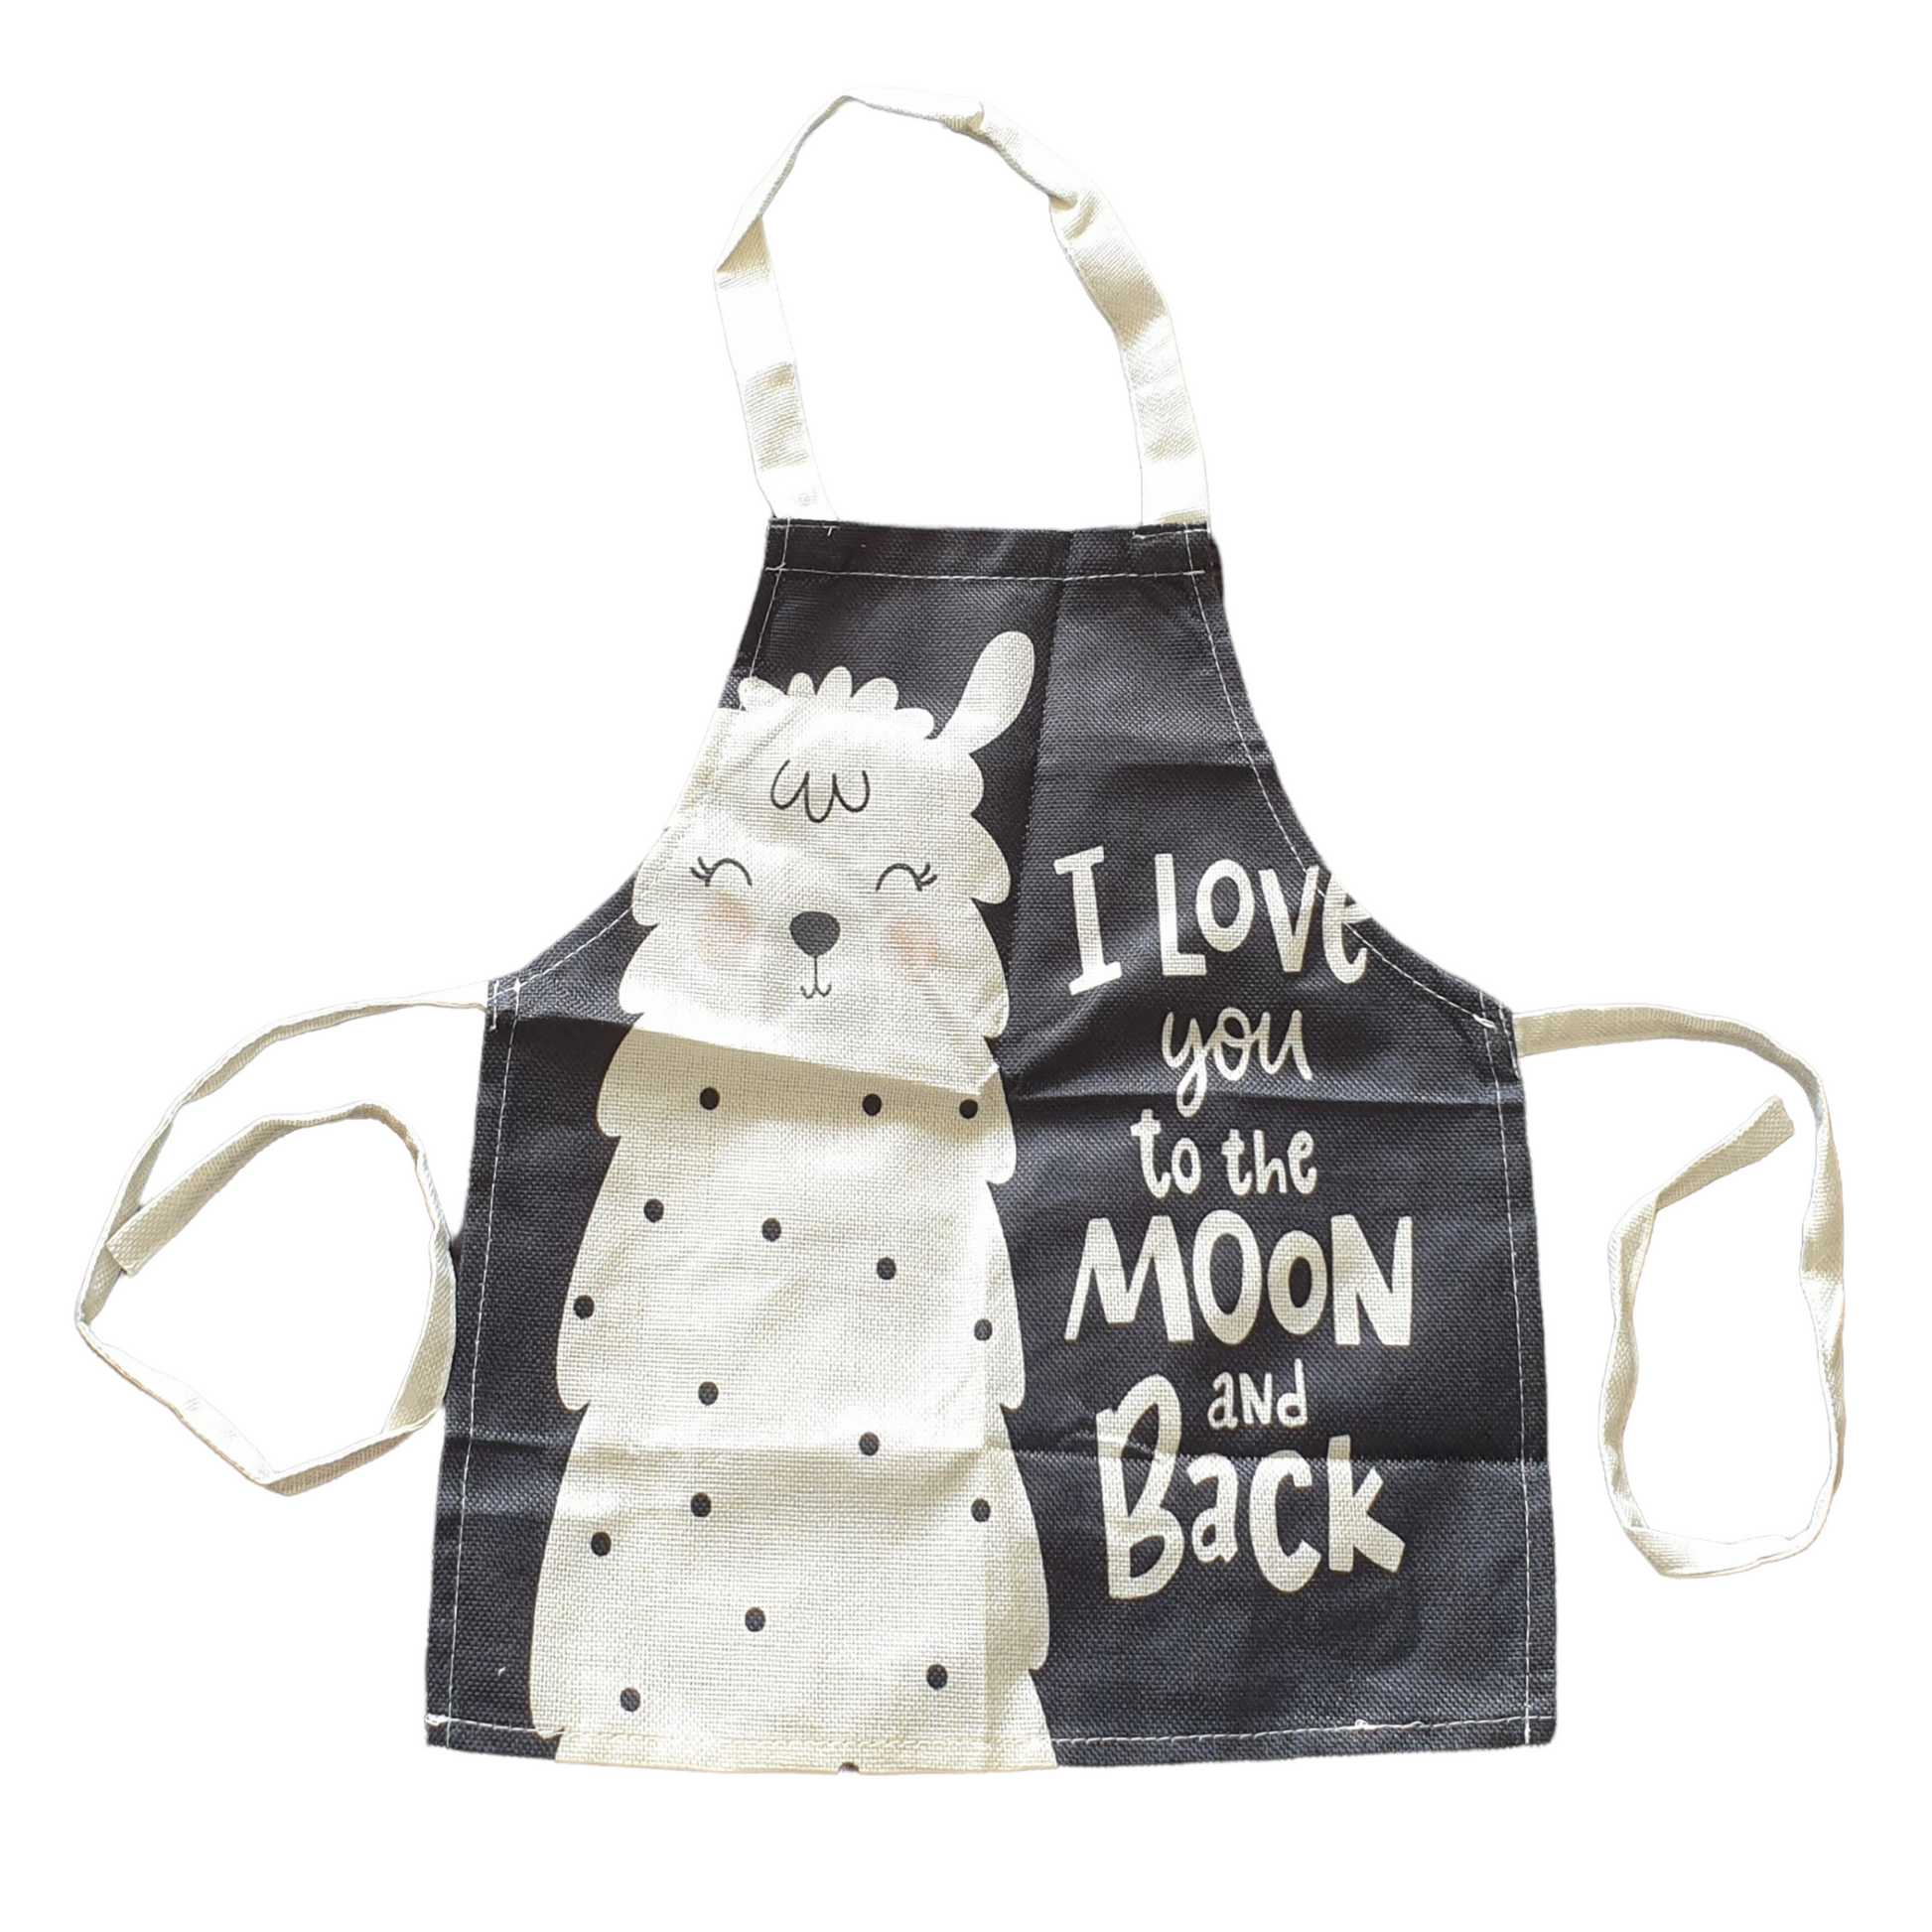 Kids Apron  SPIRIT SPARKPLUGS I Love You to the Moon and Back  